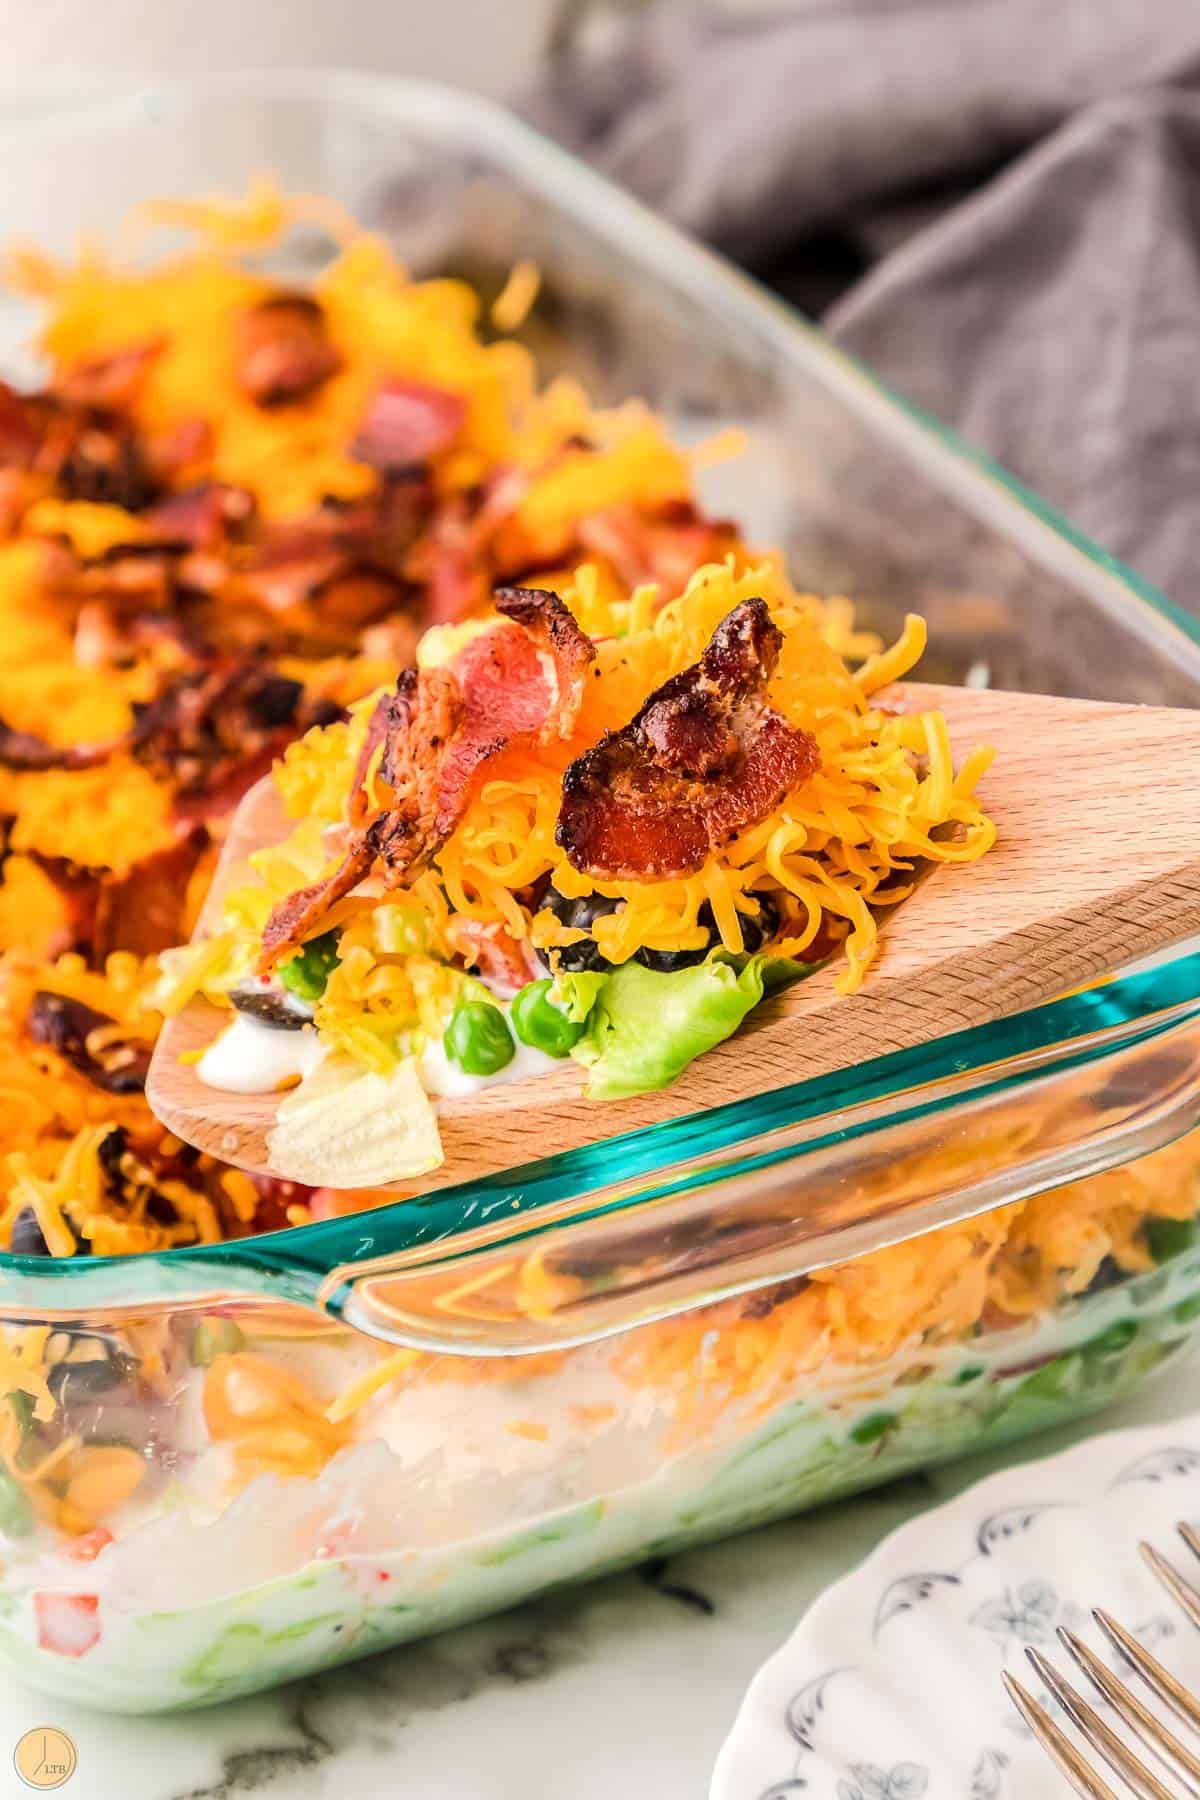 wood spoon with a scoop of salad and bacon on top as a crunchy salad topping